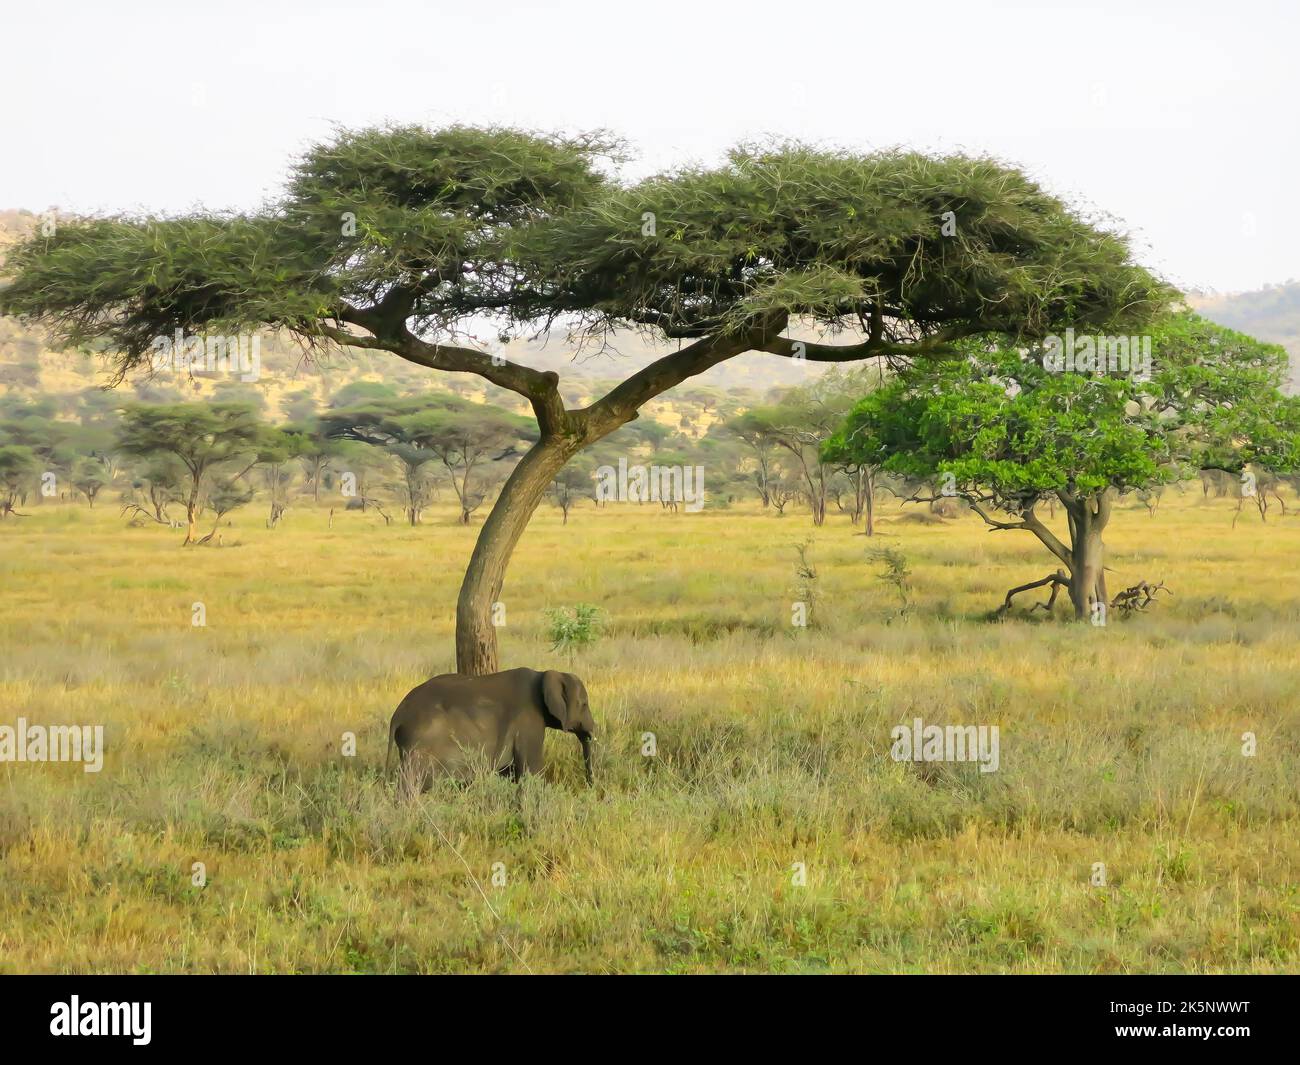 Elephant at Rest under Tree in Serengeti National Park, Tanzania, East Africa Stock Photo